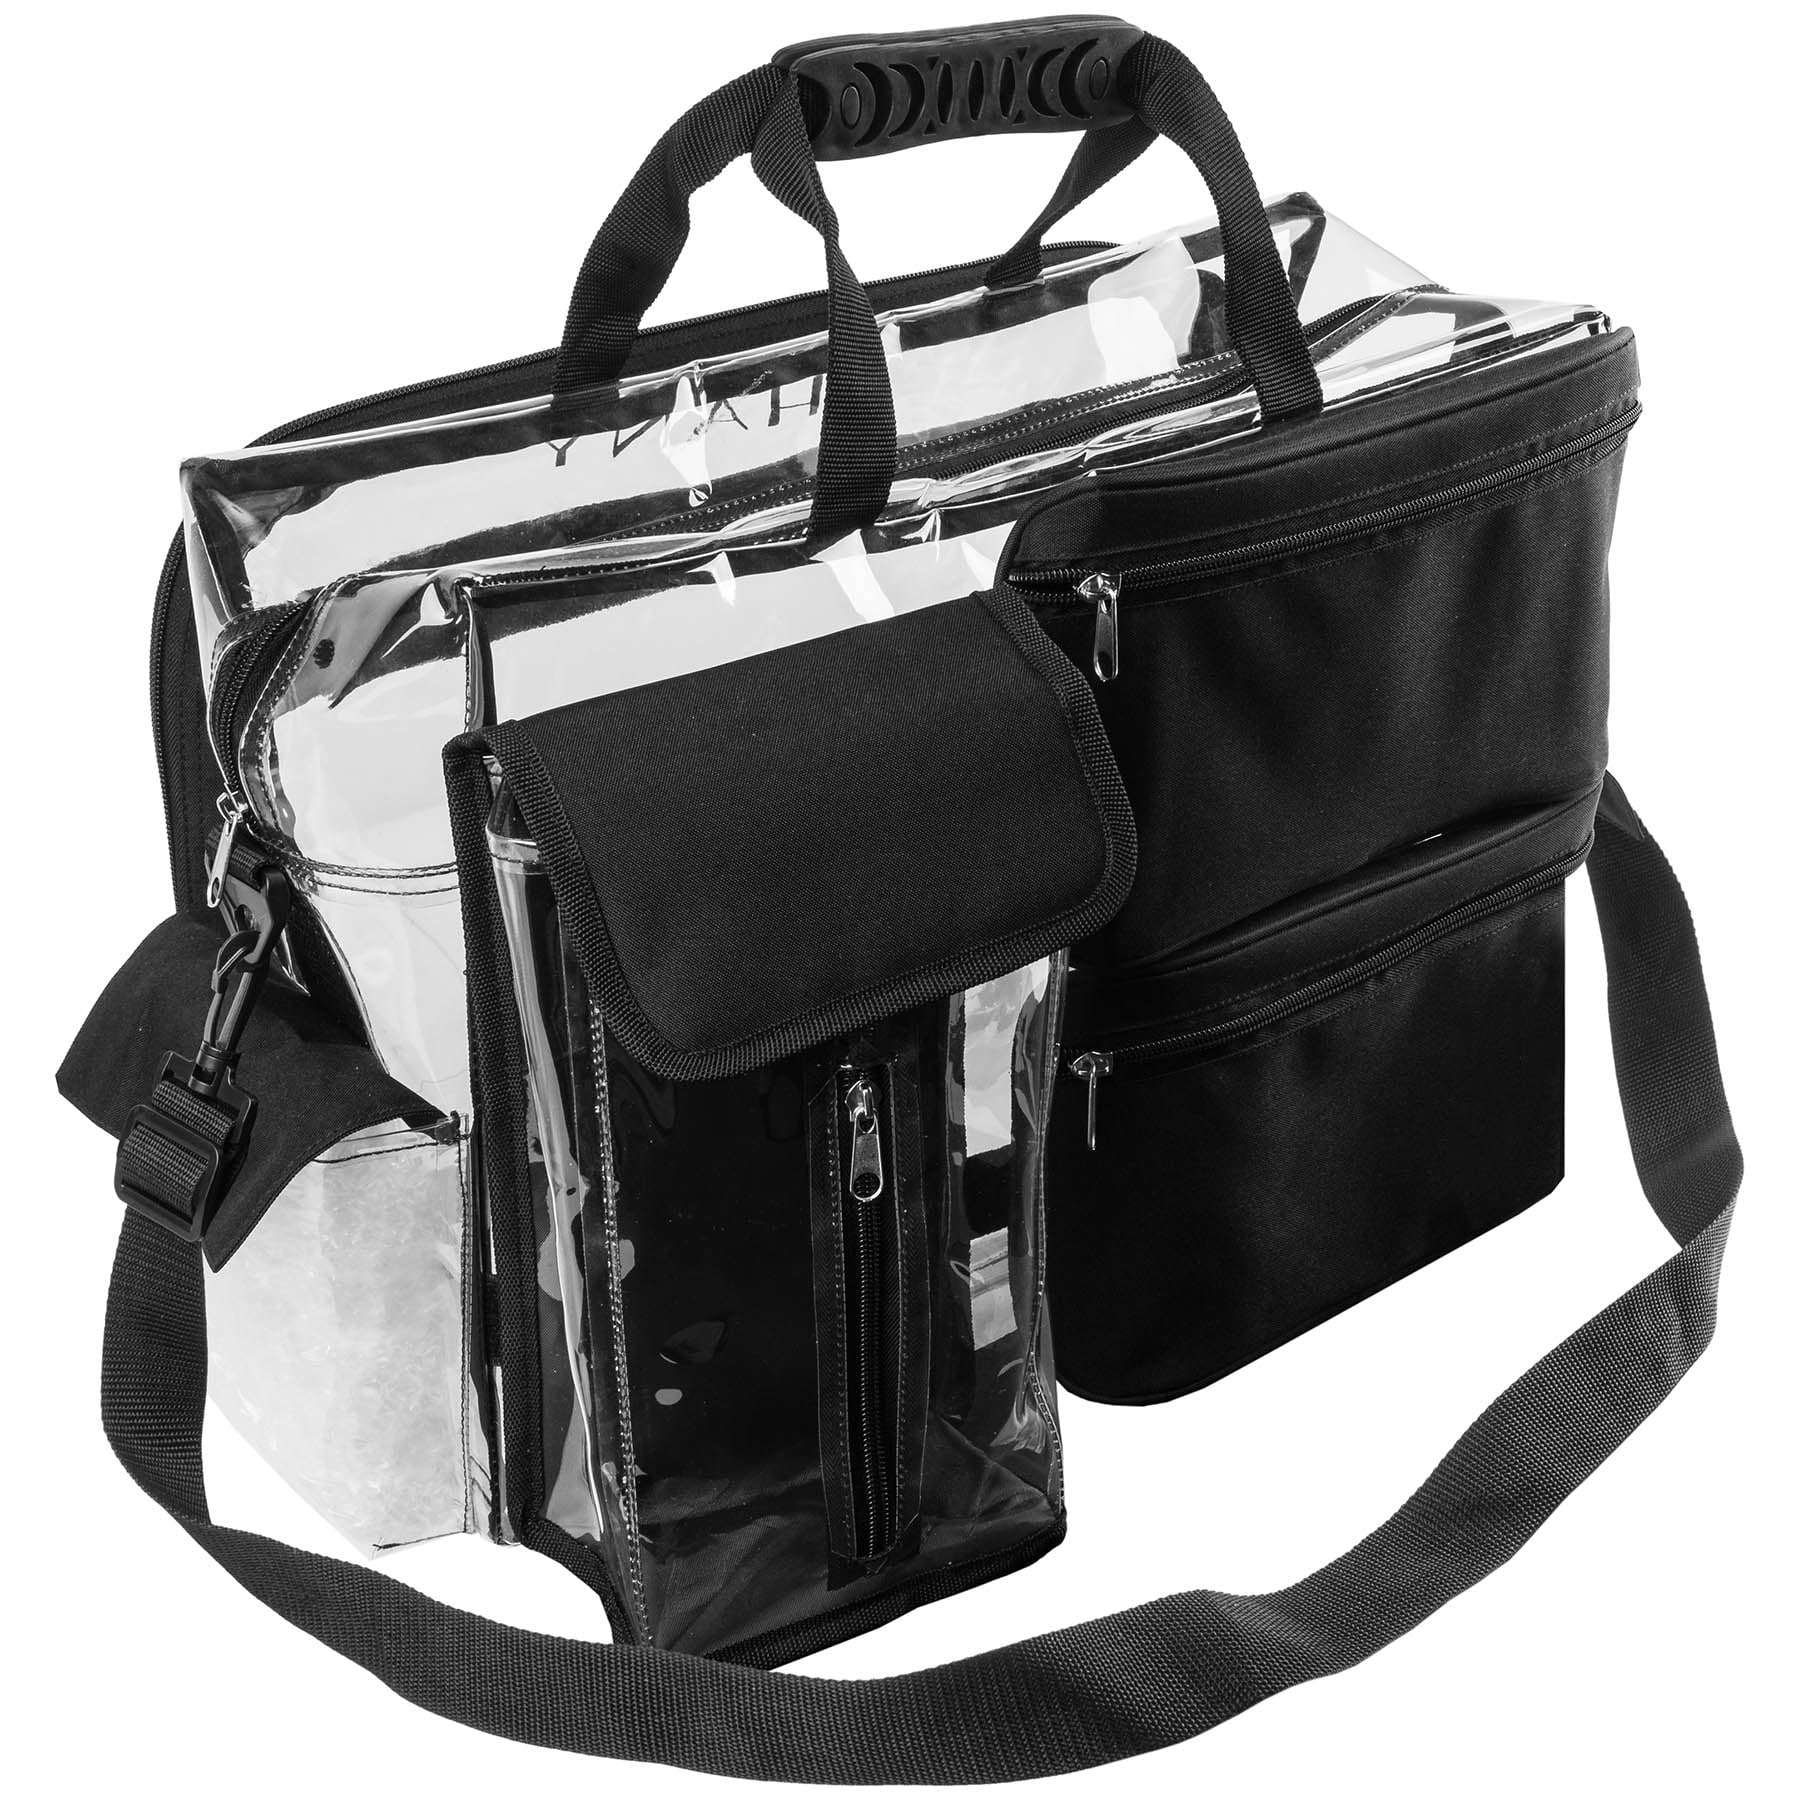 SHANY Travel Makeup Artist Bag with Removable Compartments – Clear Tote